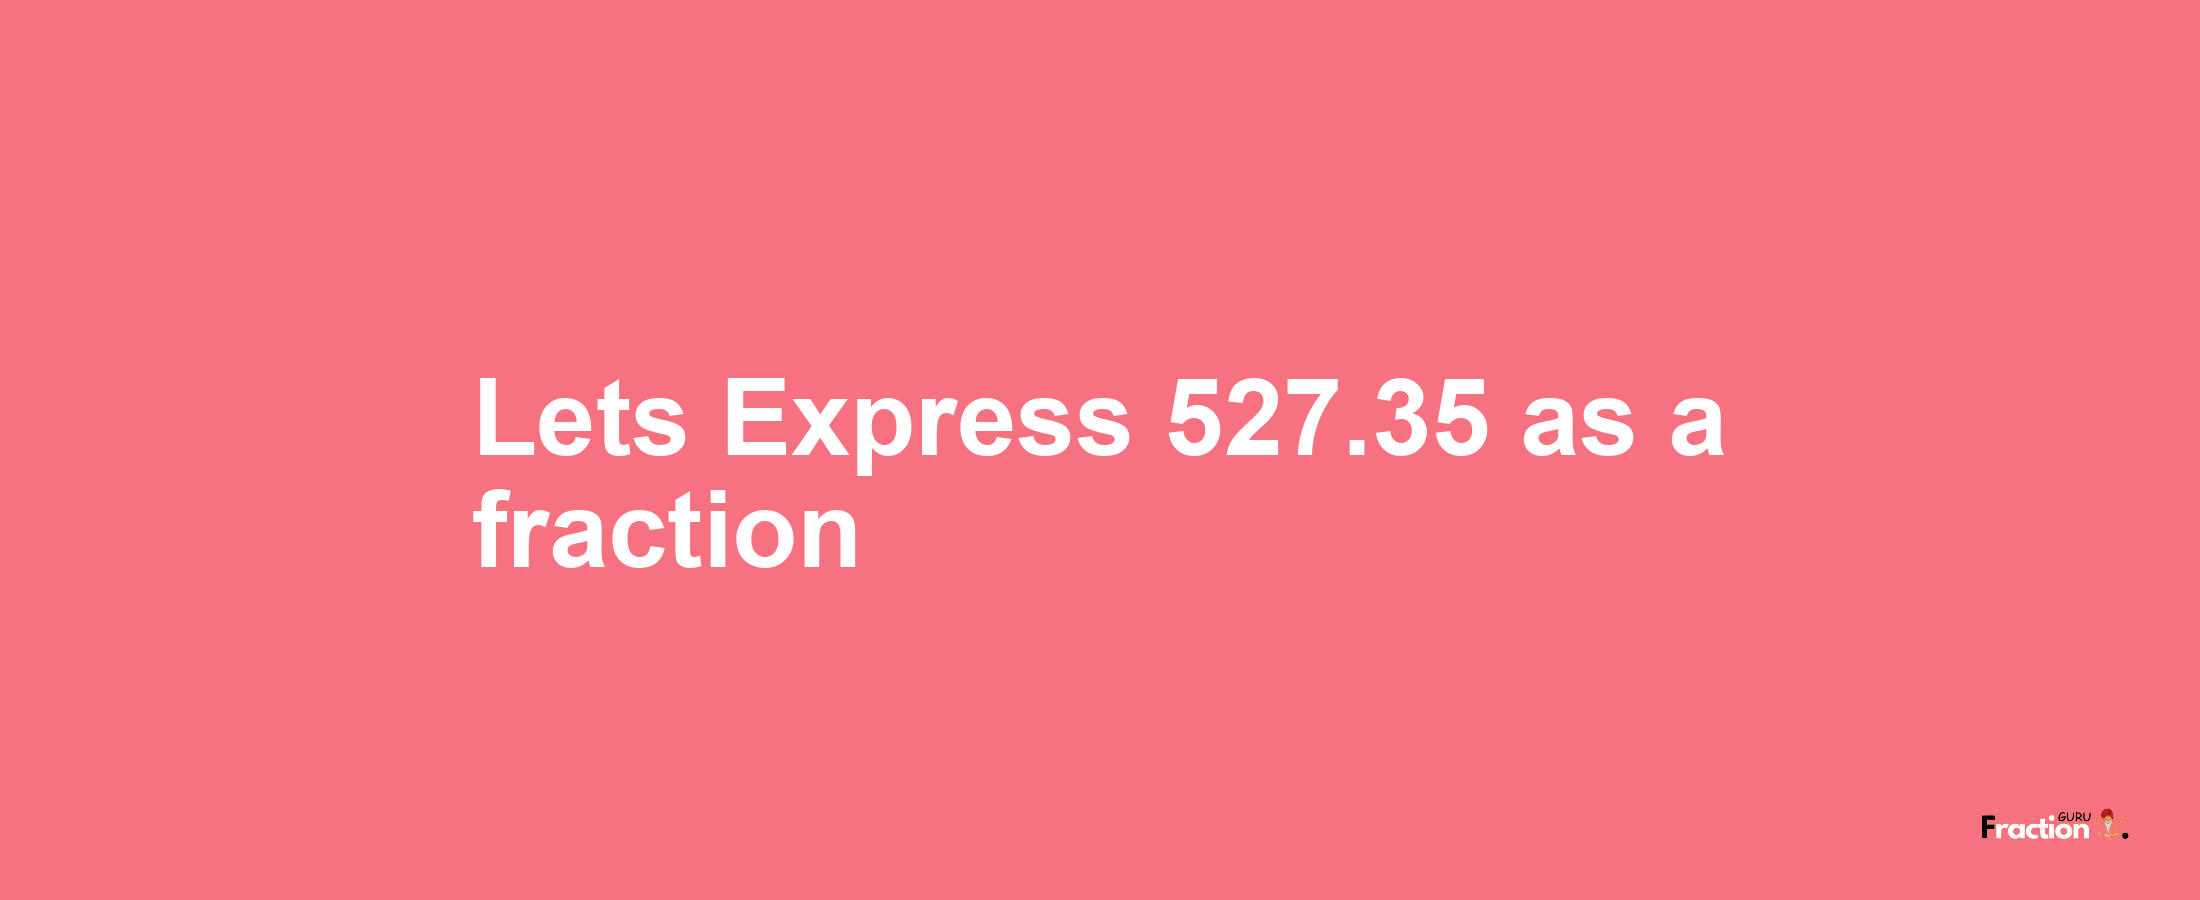 Lets Express 527.35 as afraction